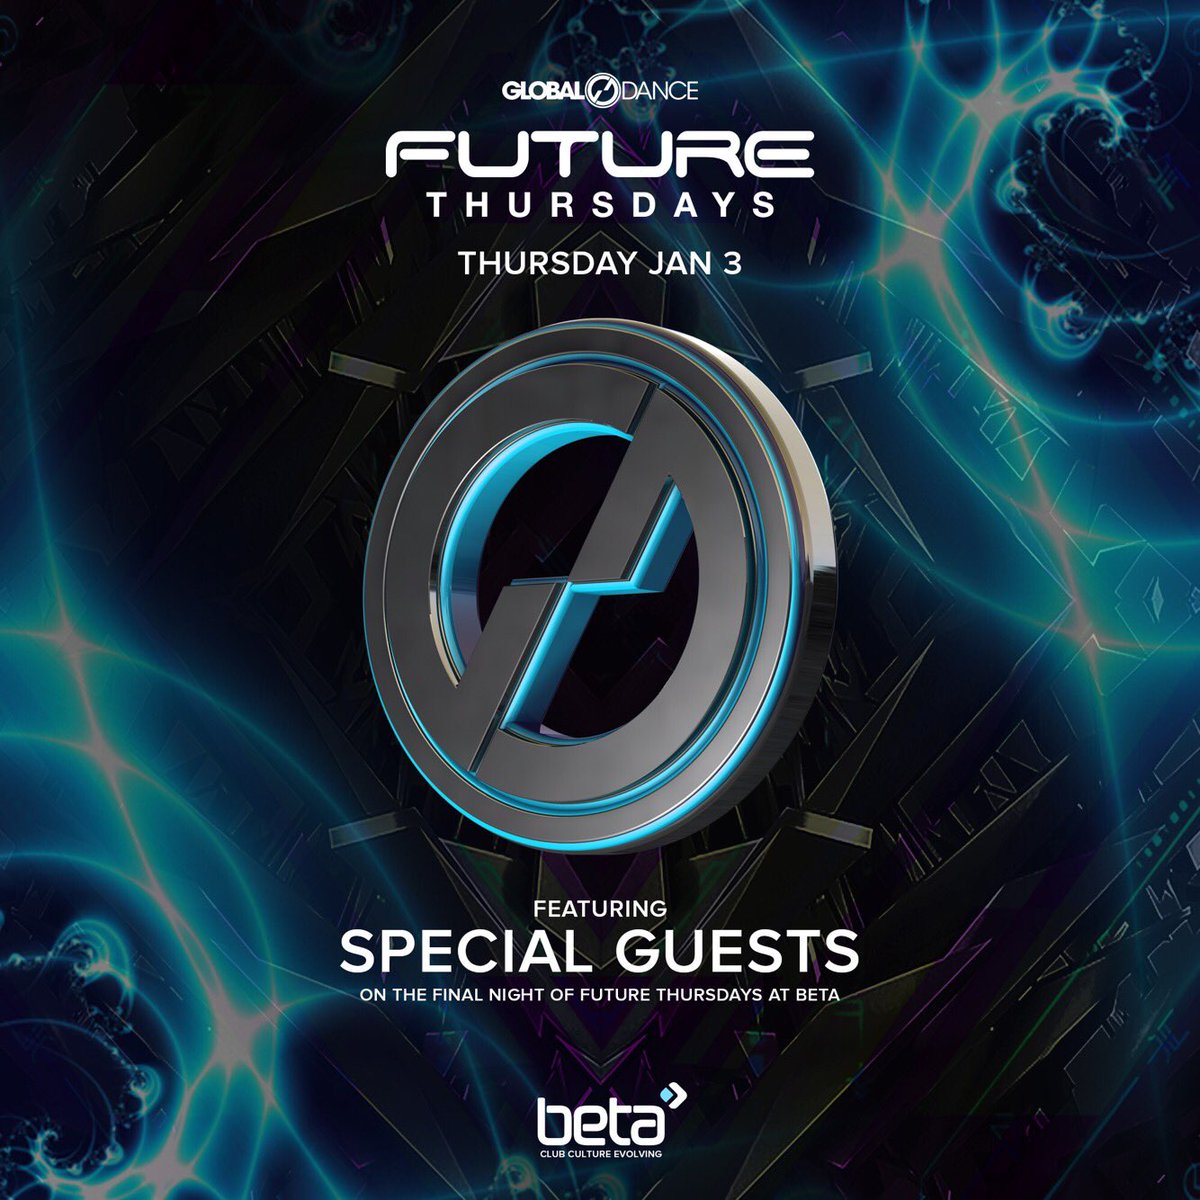 Sending it off properly for the Final #FutureThursdays tonight with Special Guests! Remember, doors open at 8pm. Grab your tickets ASAP: bit.ly/Beta-Future